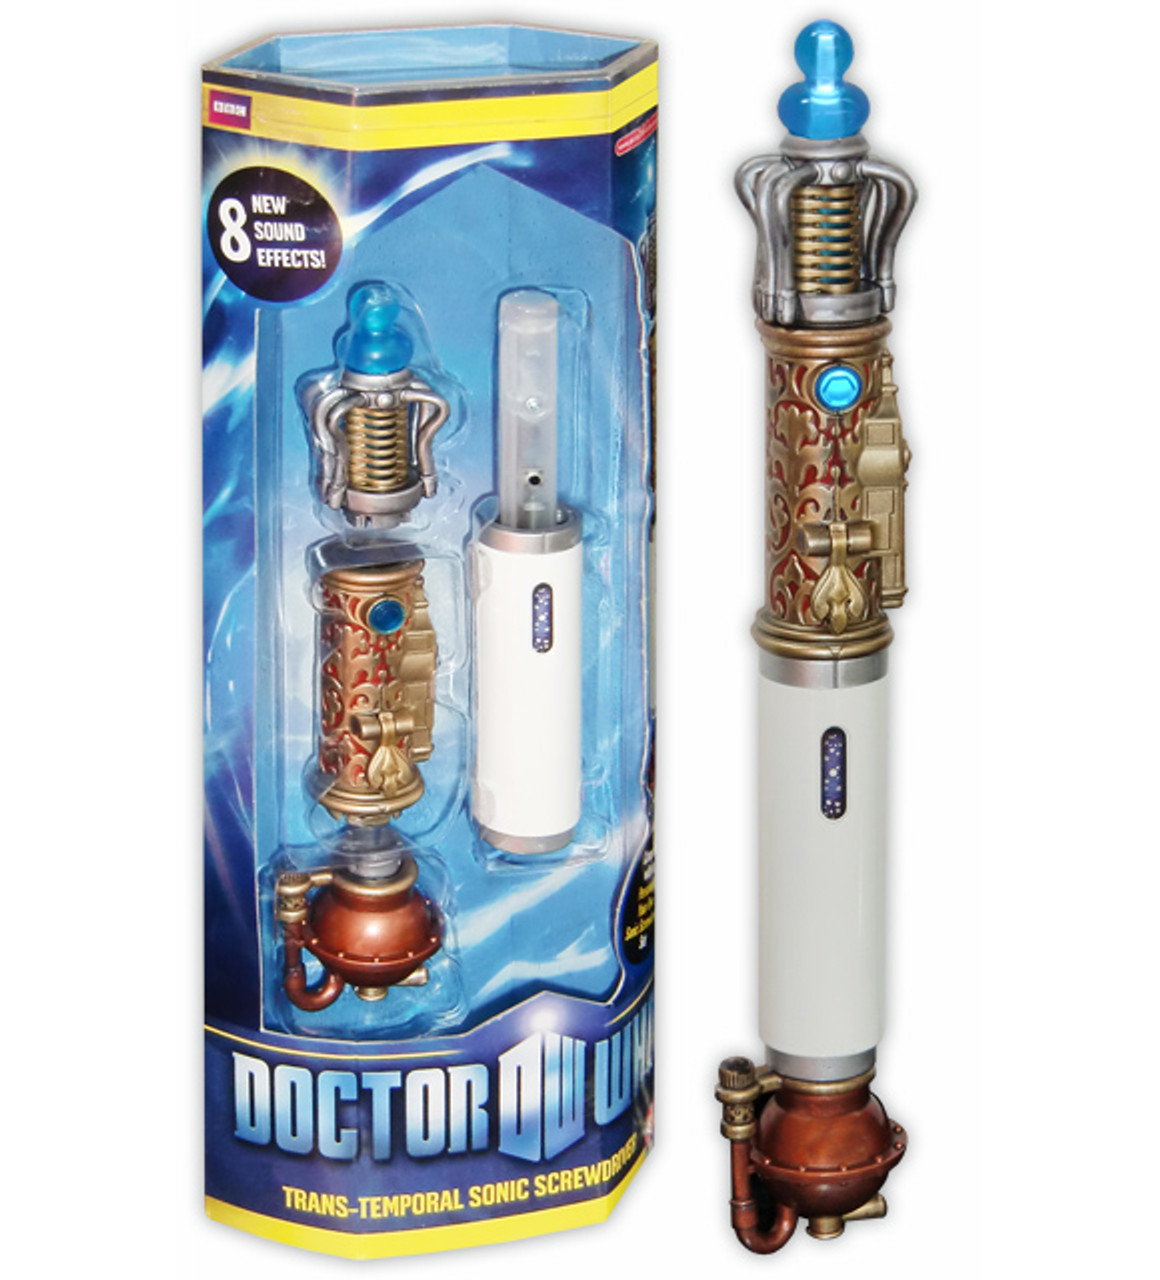 Doctor Who Personalize Your Sonic Screwdriver Set 